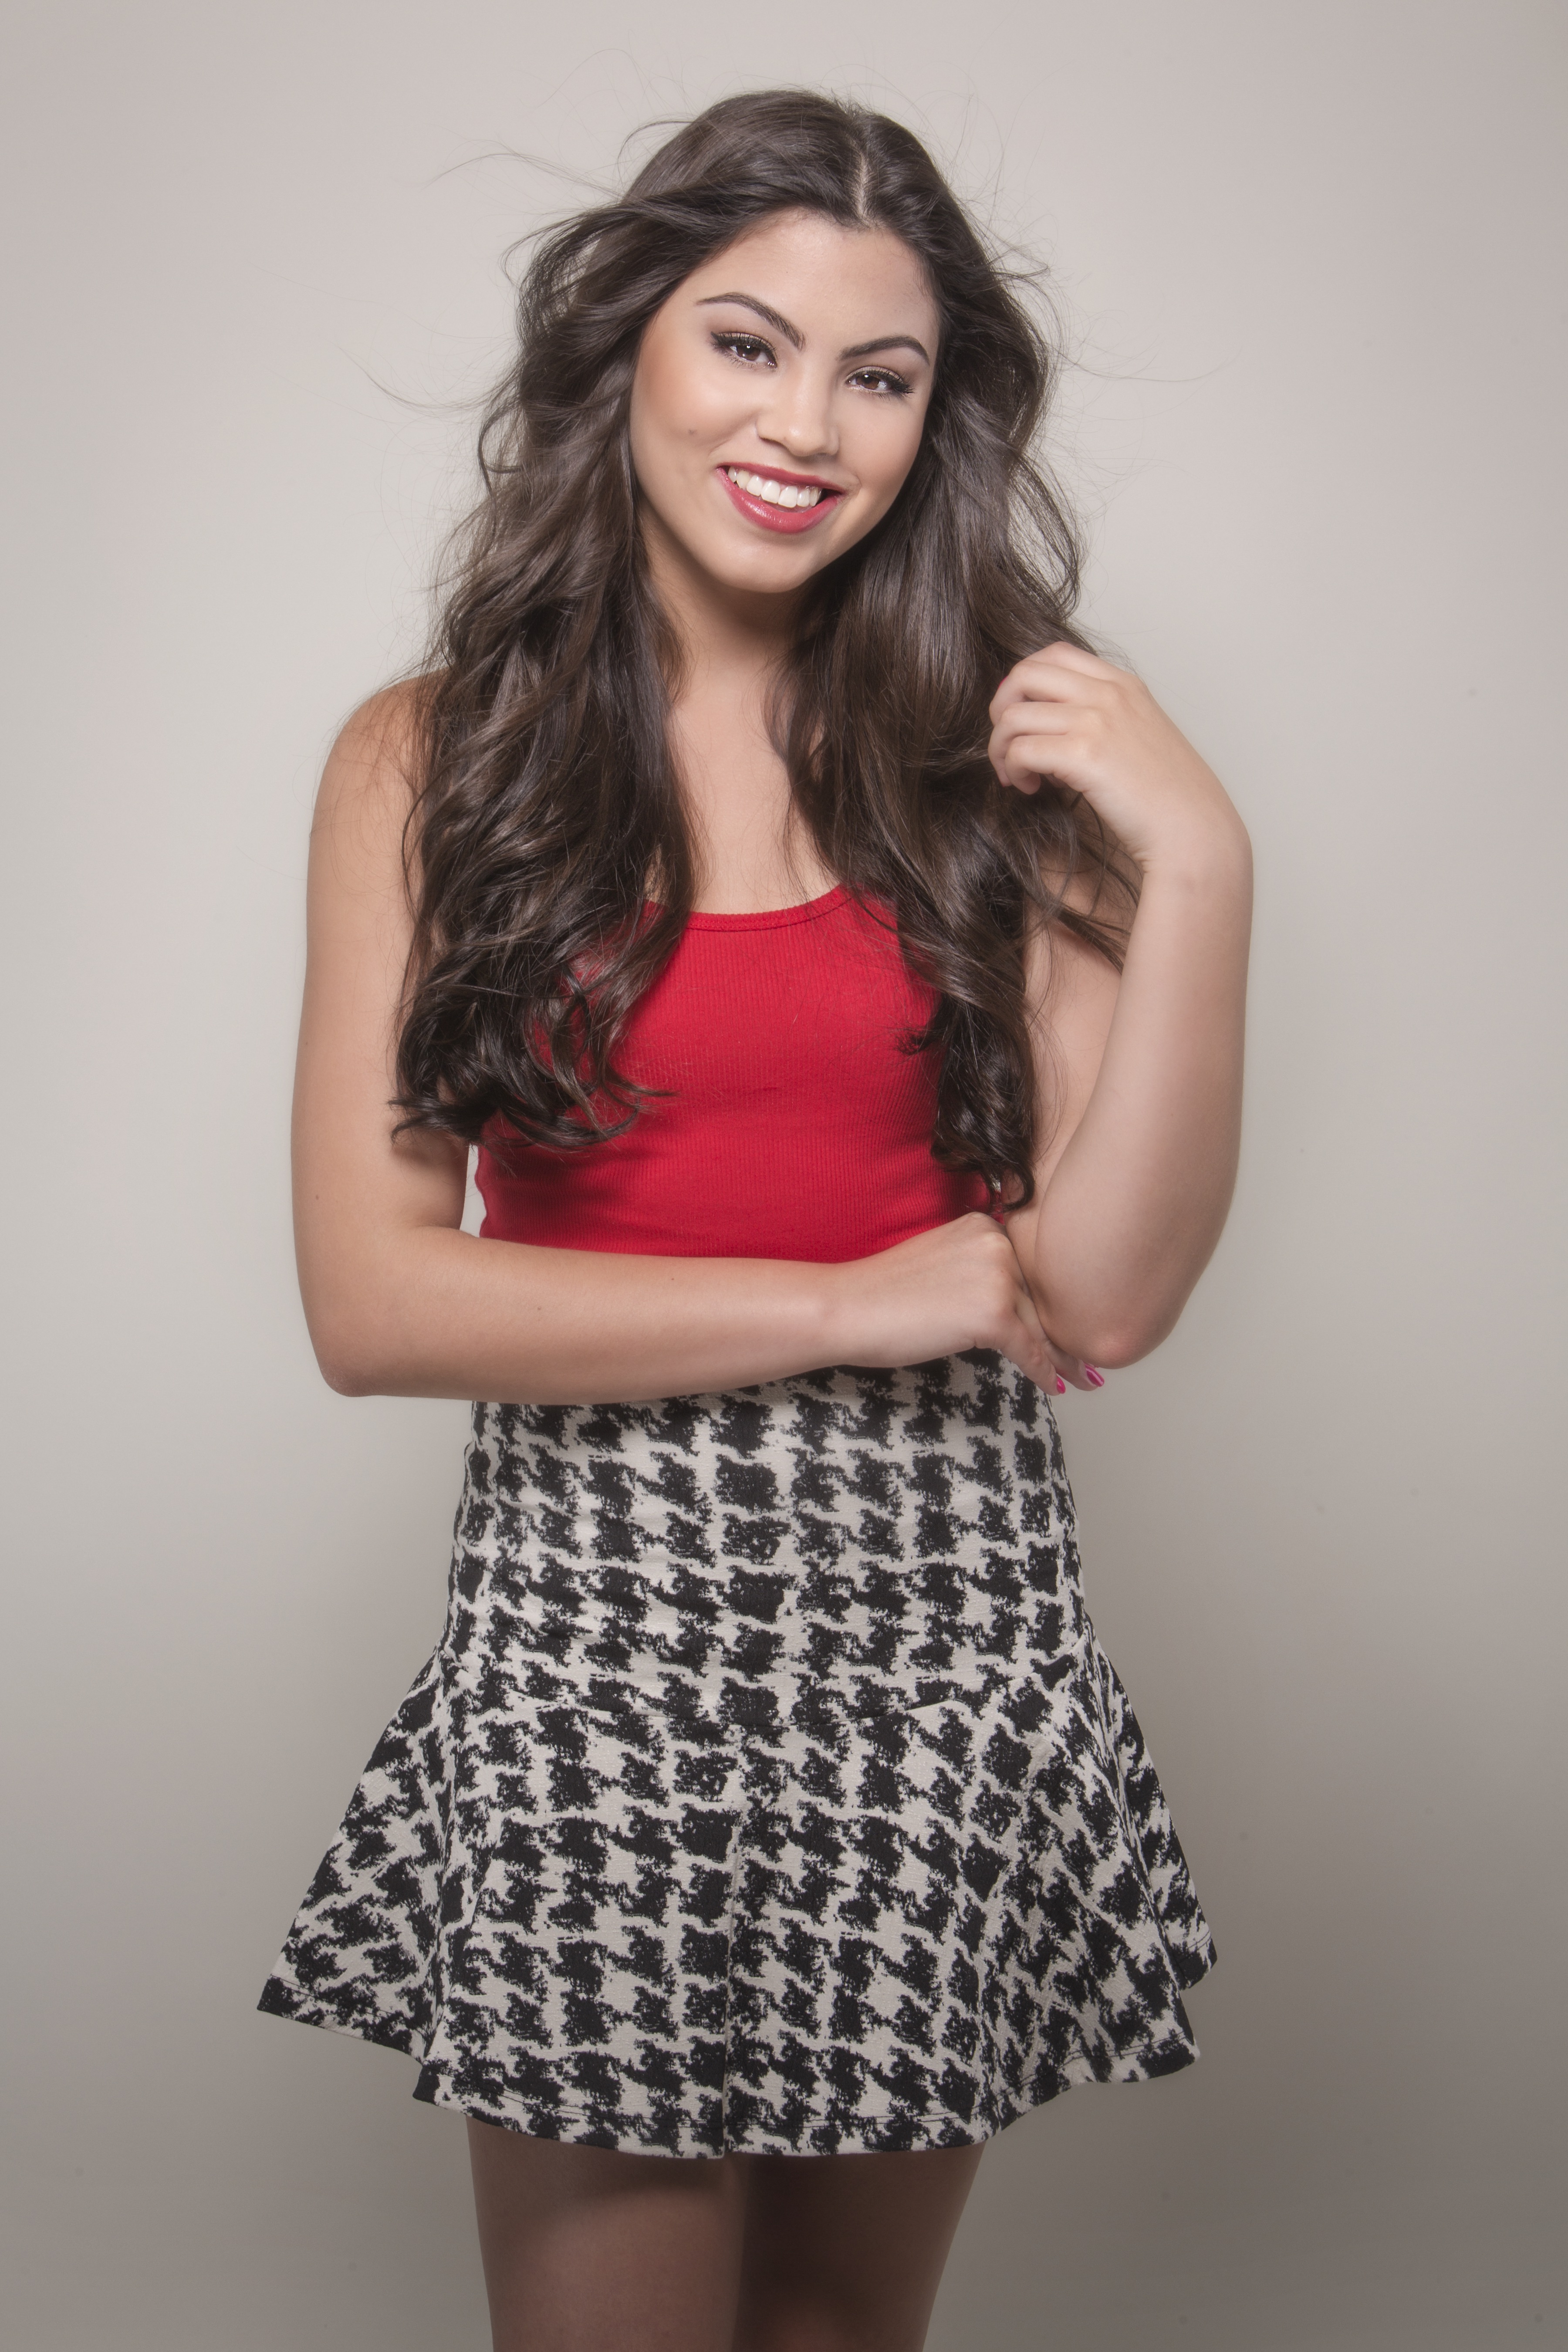 Paola Andino, star of Nickelodeon’s 'Every Witch Way' talks Emma,...